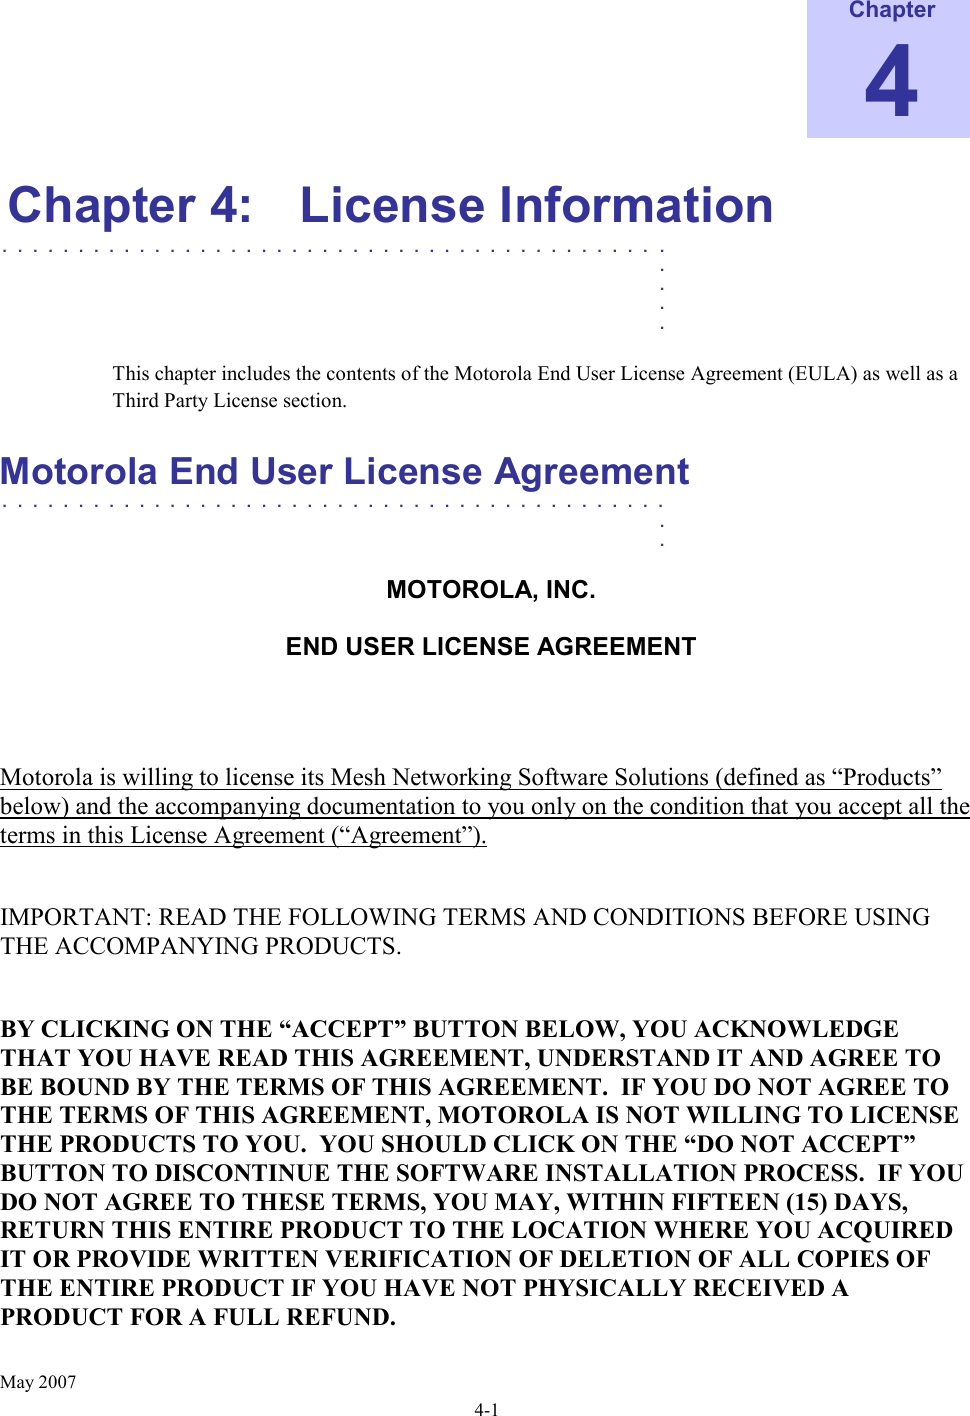      May 2007 4-1 Chapter 4 Chapter 4:  License Information ............................................   .    .    .    .  This chapter includes the contents of the Motorola End User License Agreement (EULA) as well as a Third Party License section.  Motorola End User License Agreement  ............................................   .    .  MOTOROLA, INC.  END USER LICENSE AGREEMENT  Motorola is willing to license its Mesh Networking Software Solutions (defined as “Products” below) and the accompanying documentation to you only on the condition that you accept all the terms in this License Agreement (“Agreement”).  IMPORTANT: READ THE FOLLOWING TERMS AND CONDITIONS BEFORE USING THE ACCOMPANYING PRODUCTS.  BY CLICKING ON THE “ACCEPT” BUTTON BELOW, YOU ACKNOWLEDGE THAT YOU HAVE READ THIS AGREEMENT, UNDERSTAND IT AND AGREE TO BE BOUND BY THE TERMS OF THIS AGREEMENT.  IF YOU DO NOT AGREE TO THE TERMS OF THIS AGREEMENT, MOTOROLA IS NOT WILLING TO LICENSE THE PRODUCTS TO YOU.  YOU SHOULD CLICK ON THE “DO NOT ACCEPT” BUTTON TO DISCONTINUE THE SOFTWARE INSTALLATION PROCESS.  IF YOU DO NOT AGREE TO THESE TERMS, YOU MAY, WITHIN FIFTEEN (15) DAYS, RETURN THIS ENTIRE PRODUCT TO THE LOCATION WHERE YOU ACQUIRED IT OR PROVIDE WRITTEN VERIFICATION OF DELETION OF ALL COPIES OF THE ENTIRE PRODUCT IF YOU HAVE NOT PHYSICALLY RECEIVED A PRODUCT FOR A FULL REFUND.  